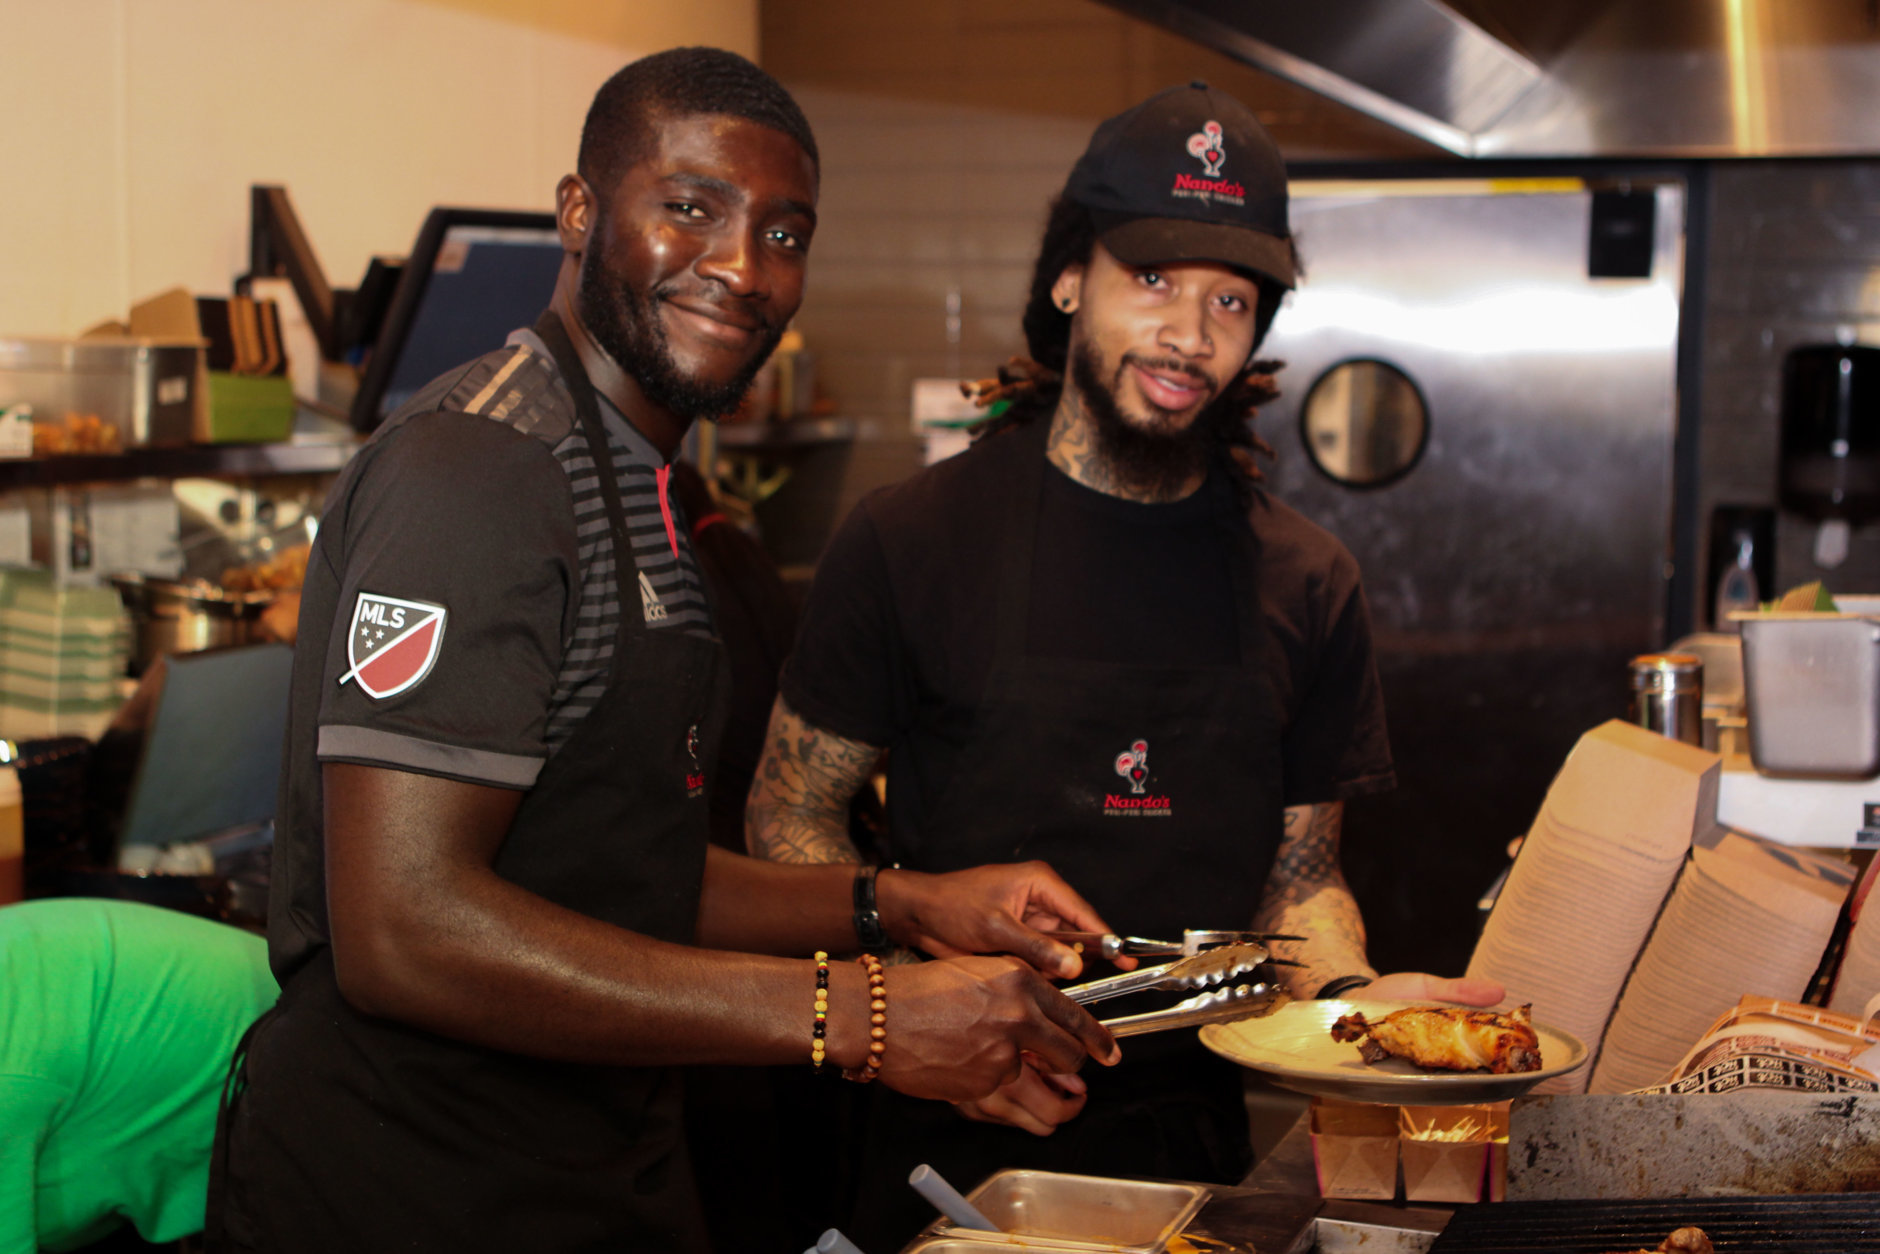 D.C. United player Kofi Opare practices his grilling skills before the April 12 event. (Courtesy Seven Oaks Media)